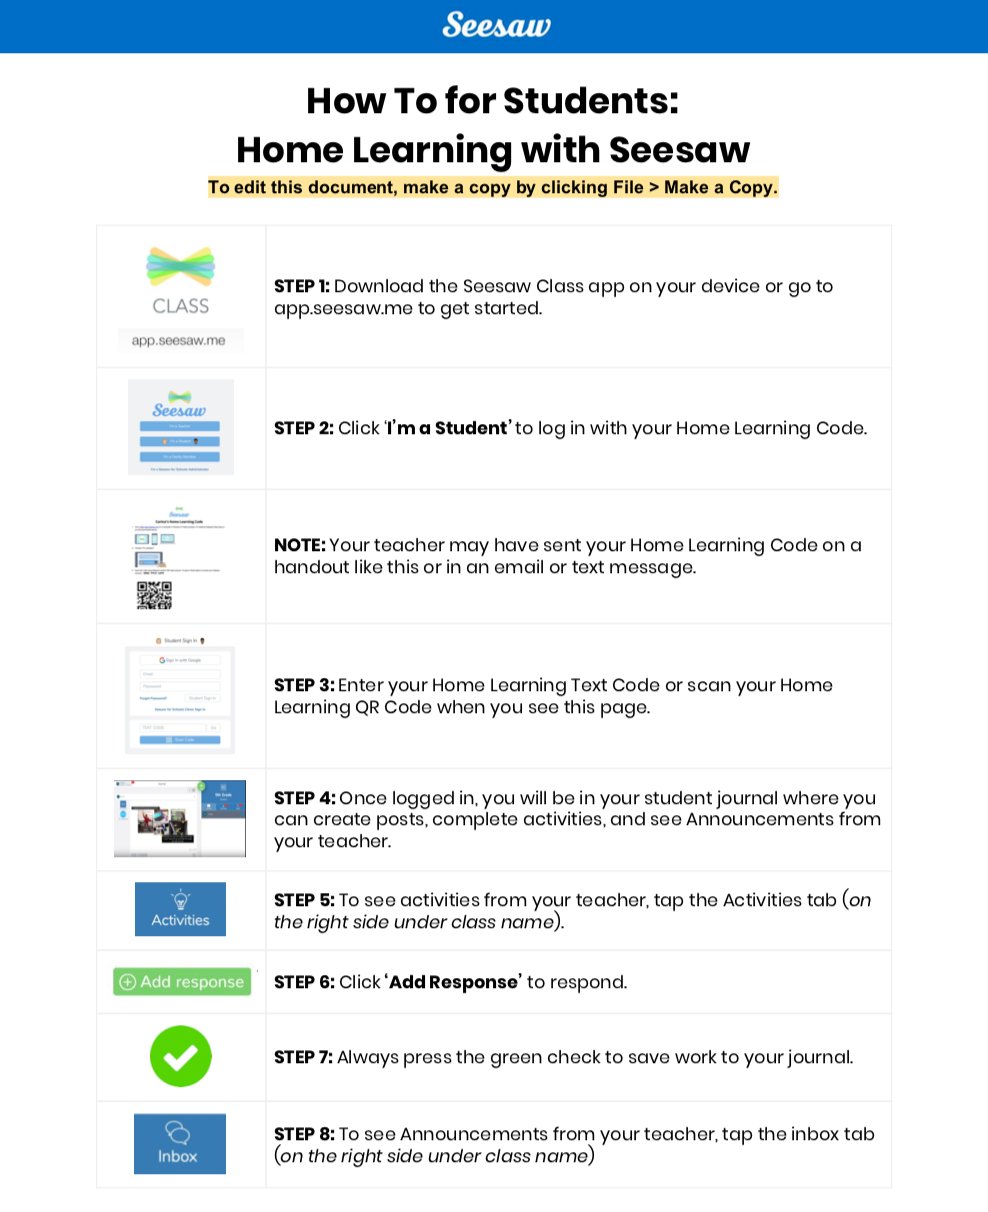 Instructions for accessing SeeSaw